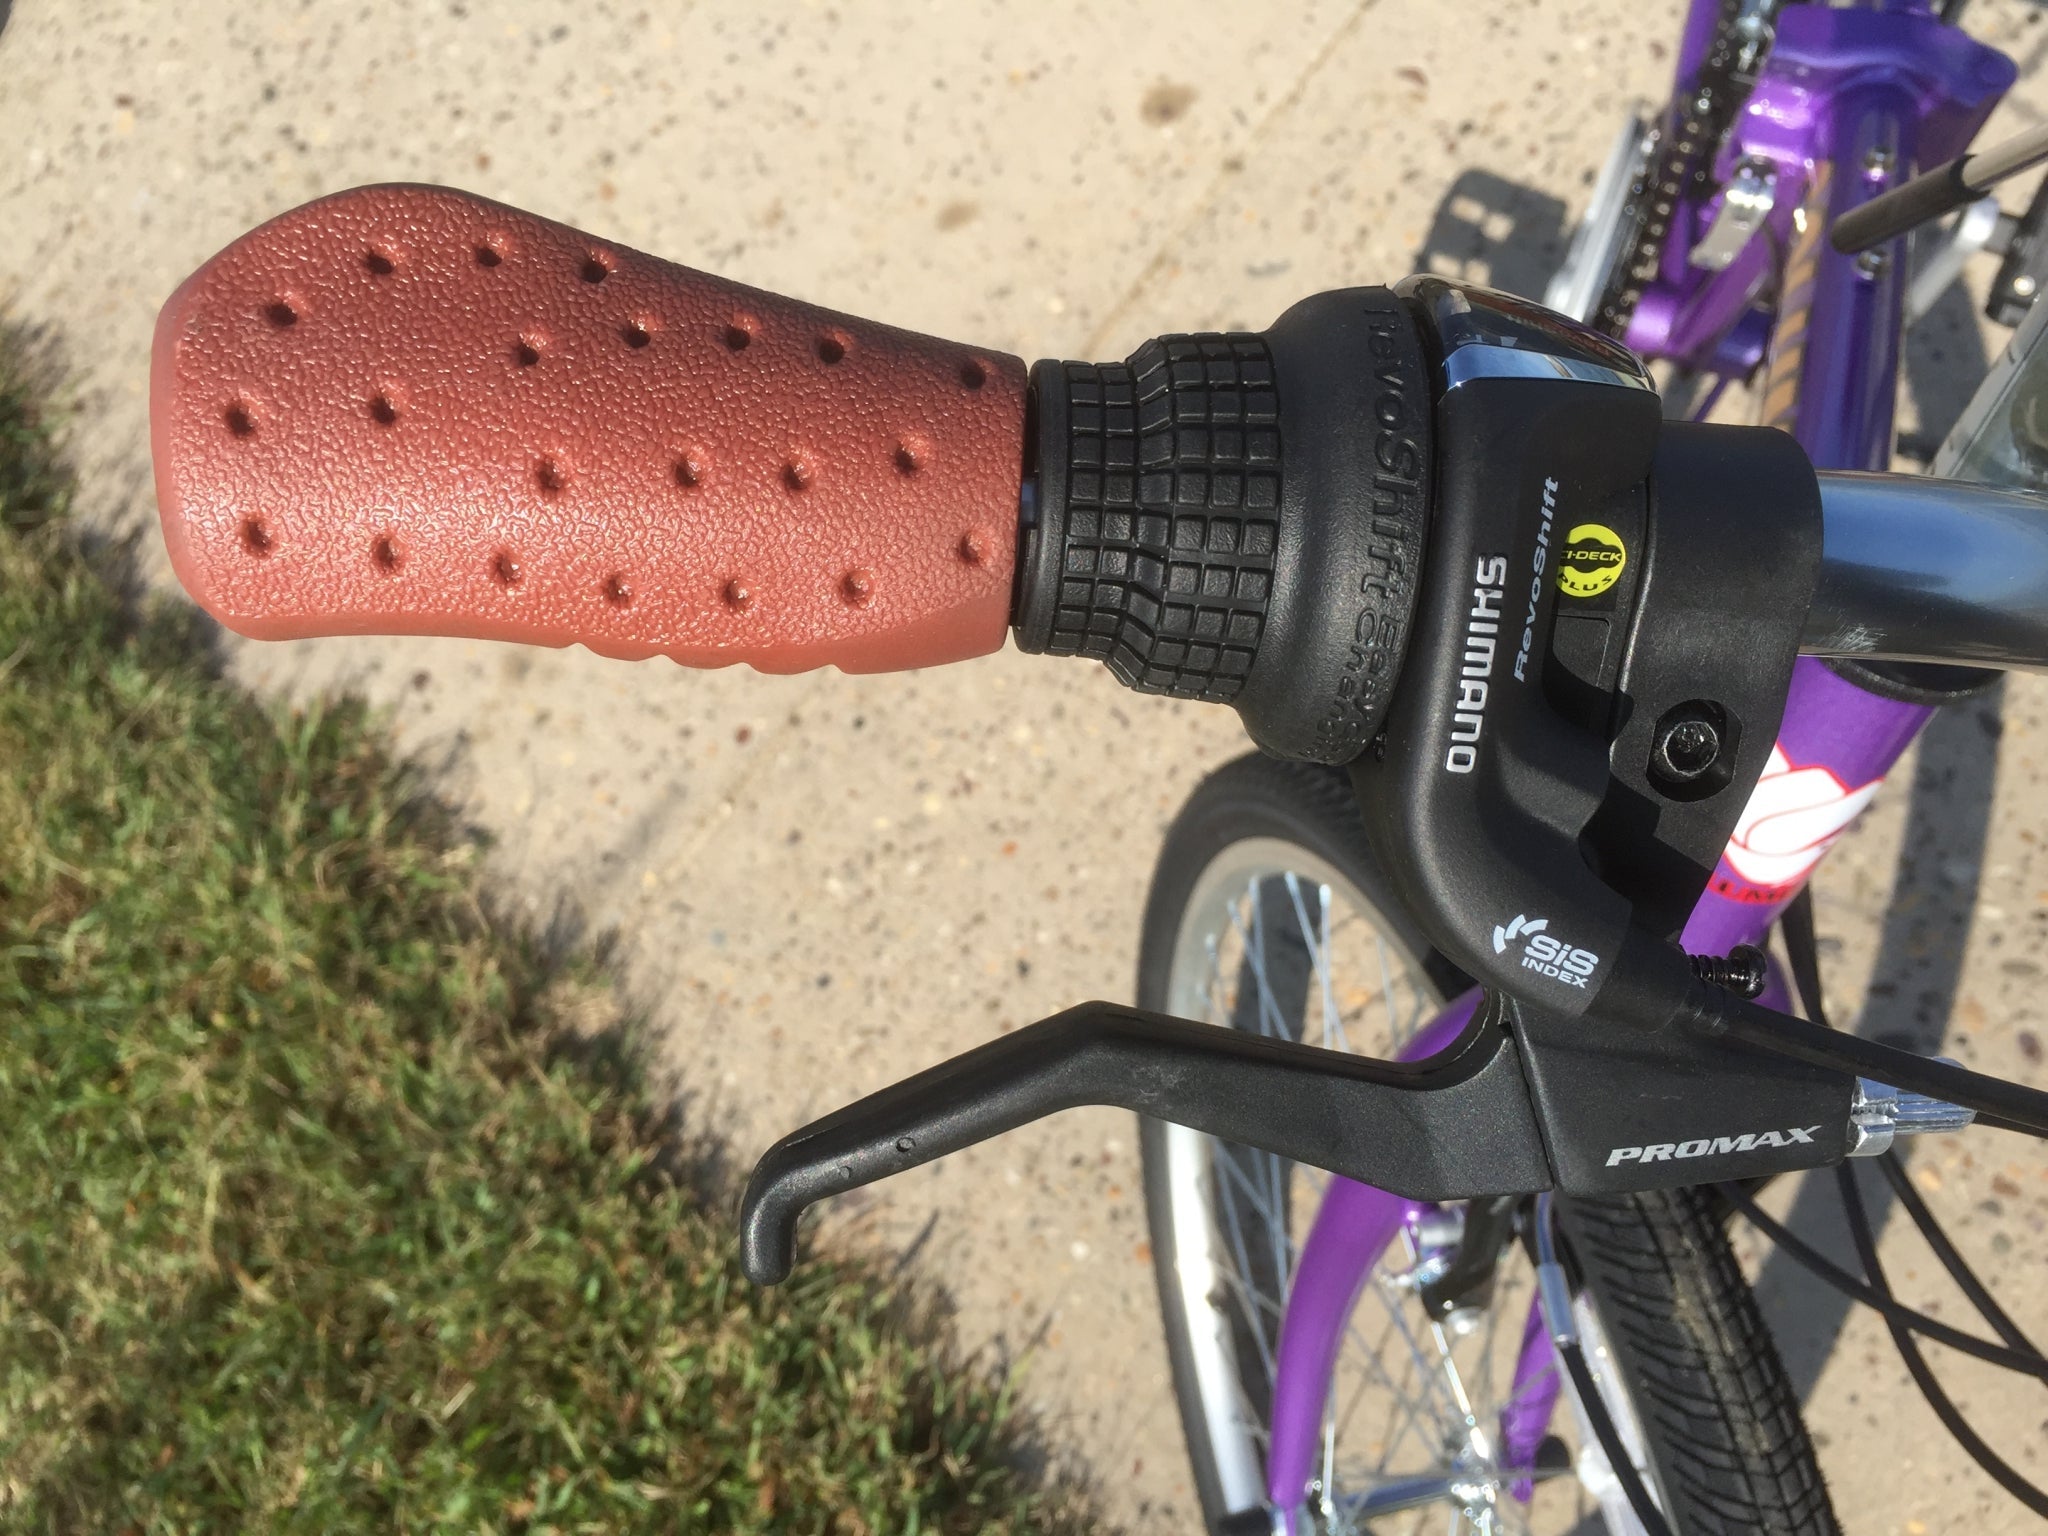 Right handlebar of a purple folding bicycle.